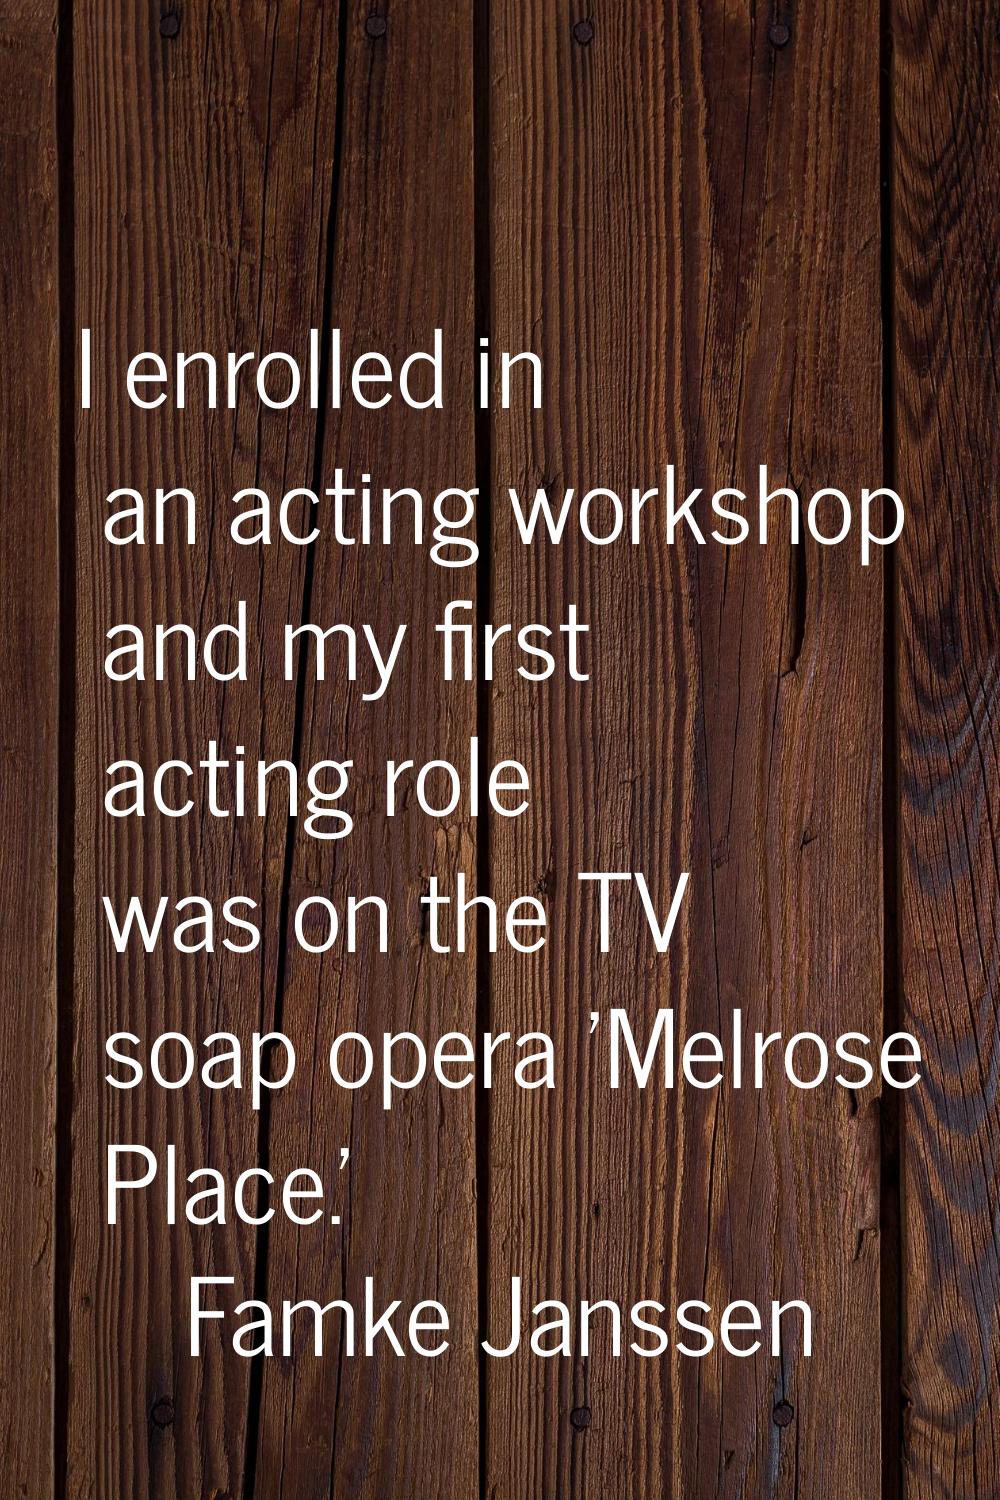 I enrolled in an acting workshop and my first acting role was on the TV soap opera 'Melrose Place.'